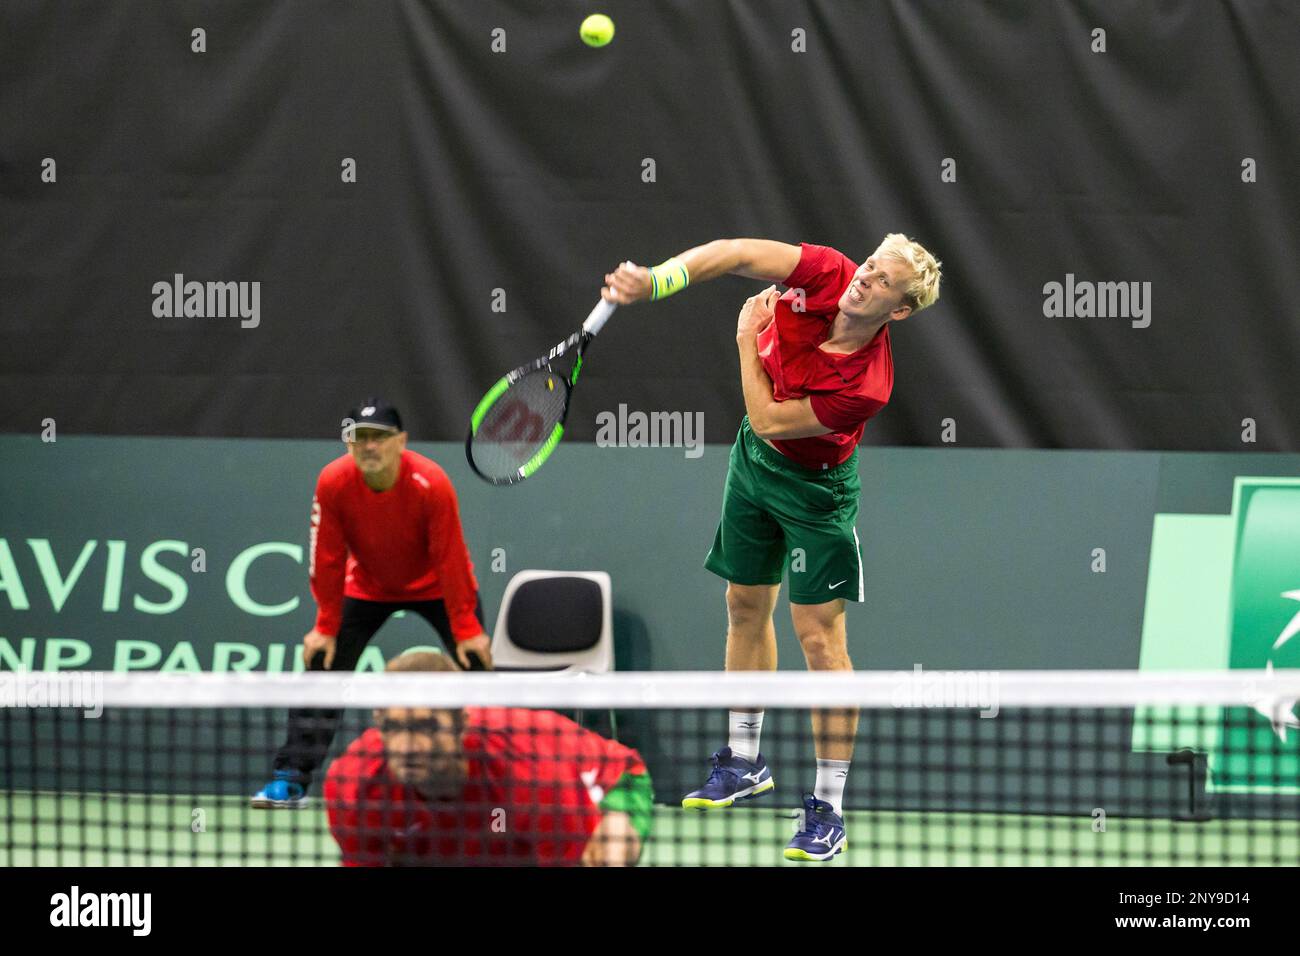 Luca Margaroli, left, and Adrian Bodmer, right, of Switzerland share a word  during their doubles match of the Davis Cup world group playoffs against  Max Mirnyi and Andrei Vasilevski of Belarus in